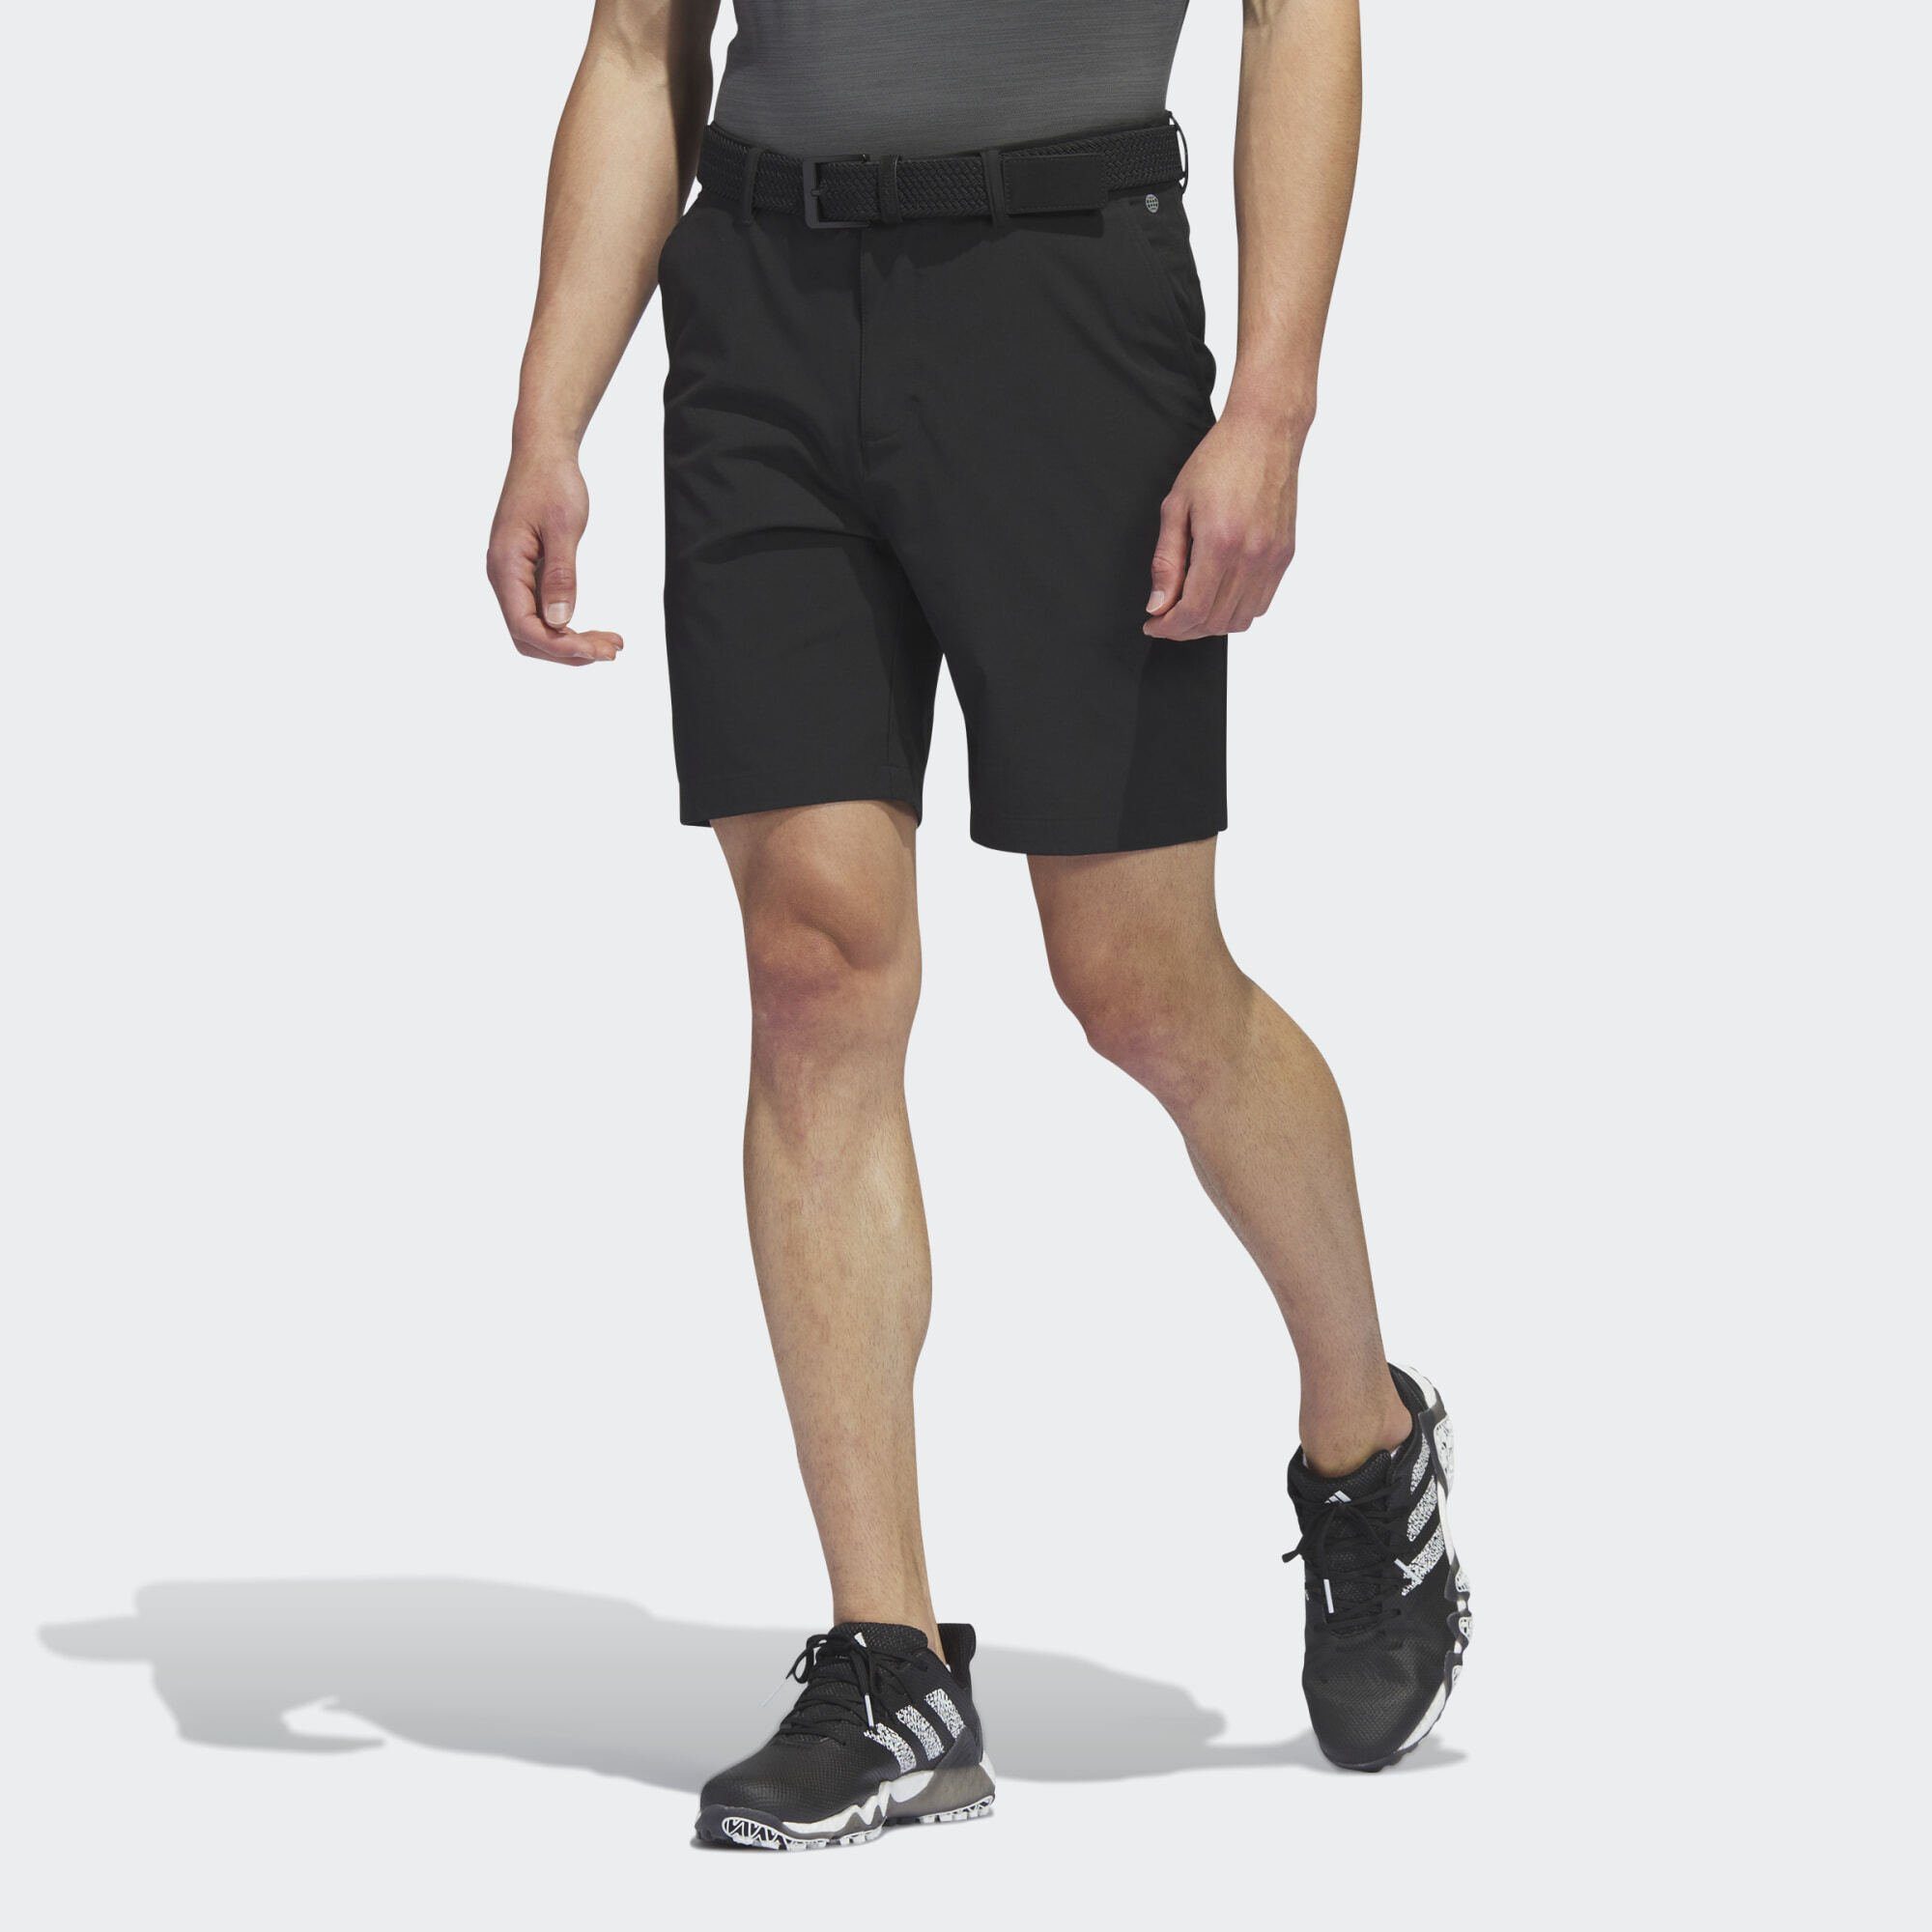 Performance 8.5-INCH Black Funktionsshorts GOLF ULTIMATE365 SHORTS adidas